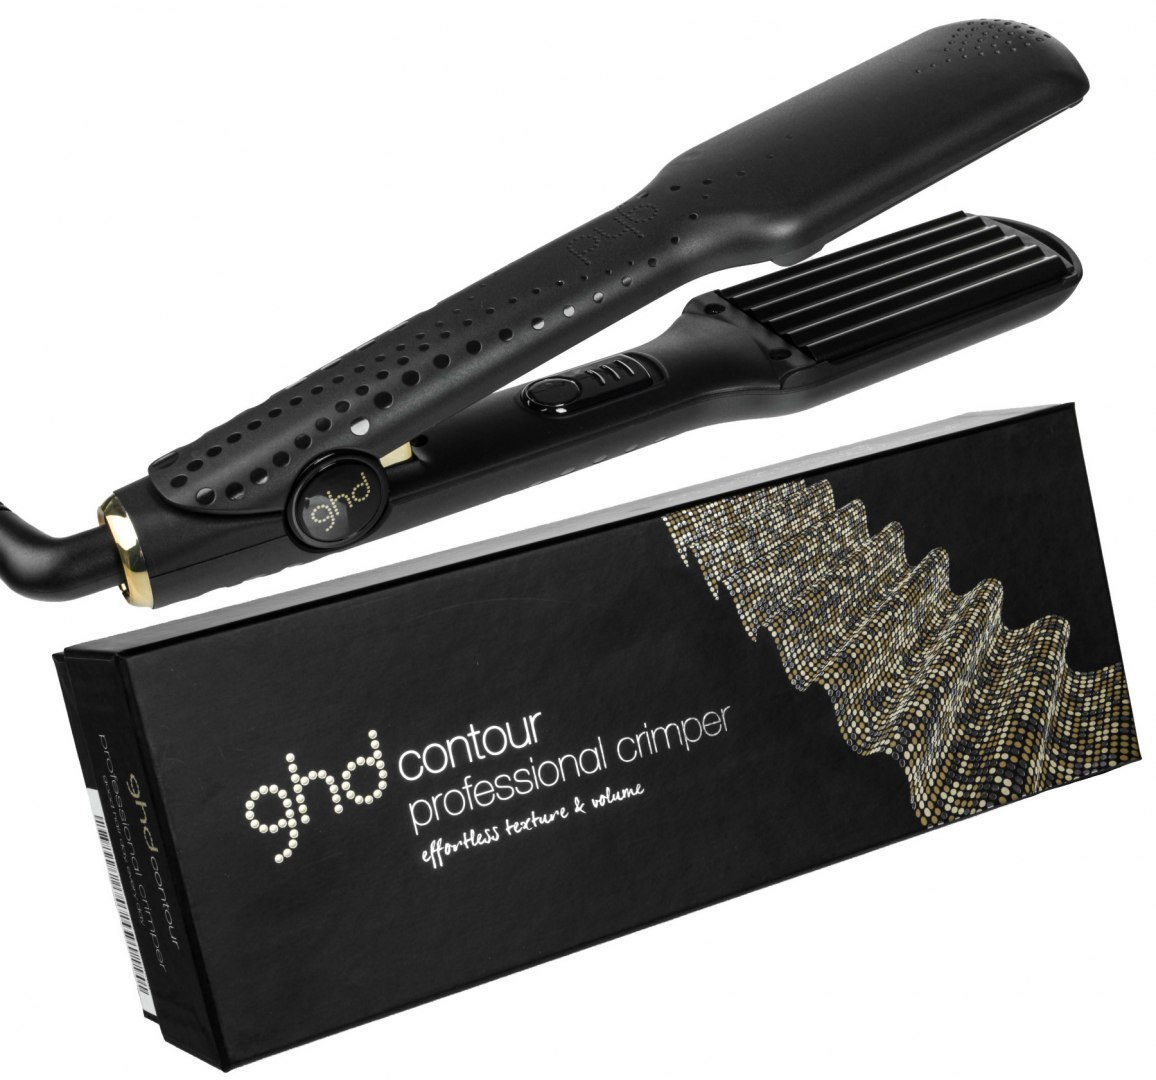 karbownica-ghd-contour-professional-crimper